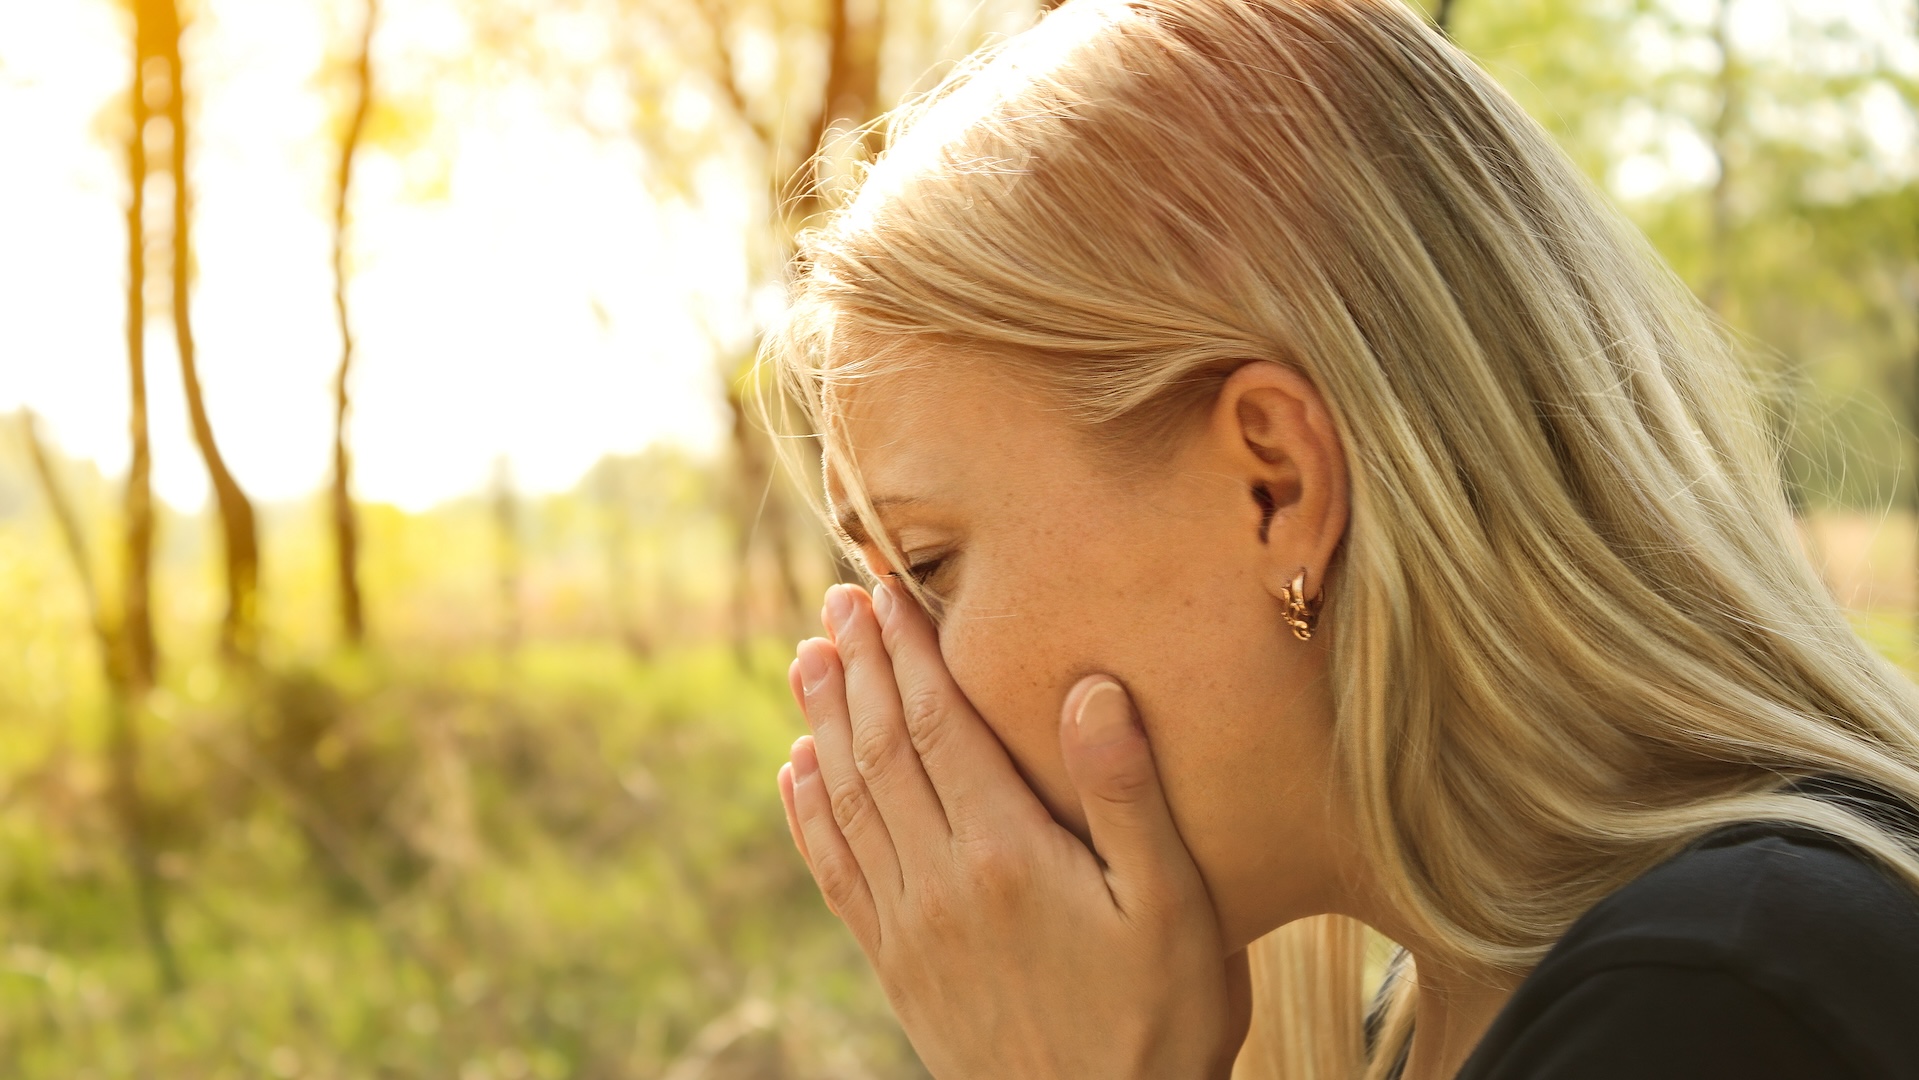 Why does the sun make people sneeze?